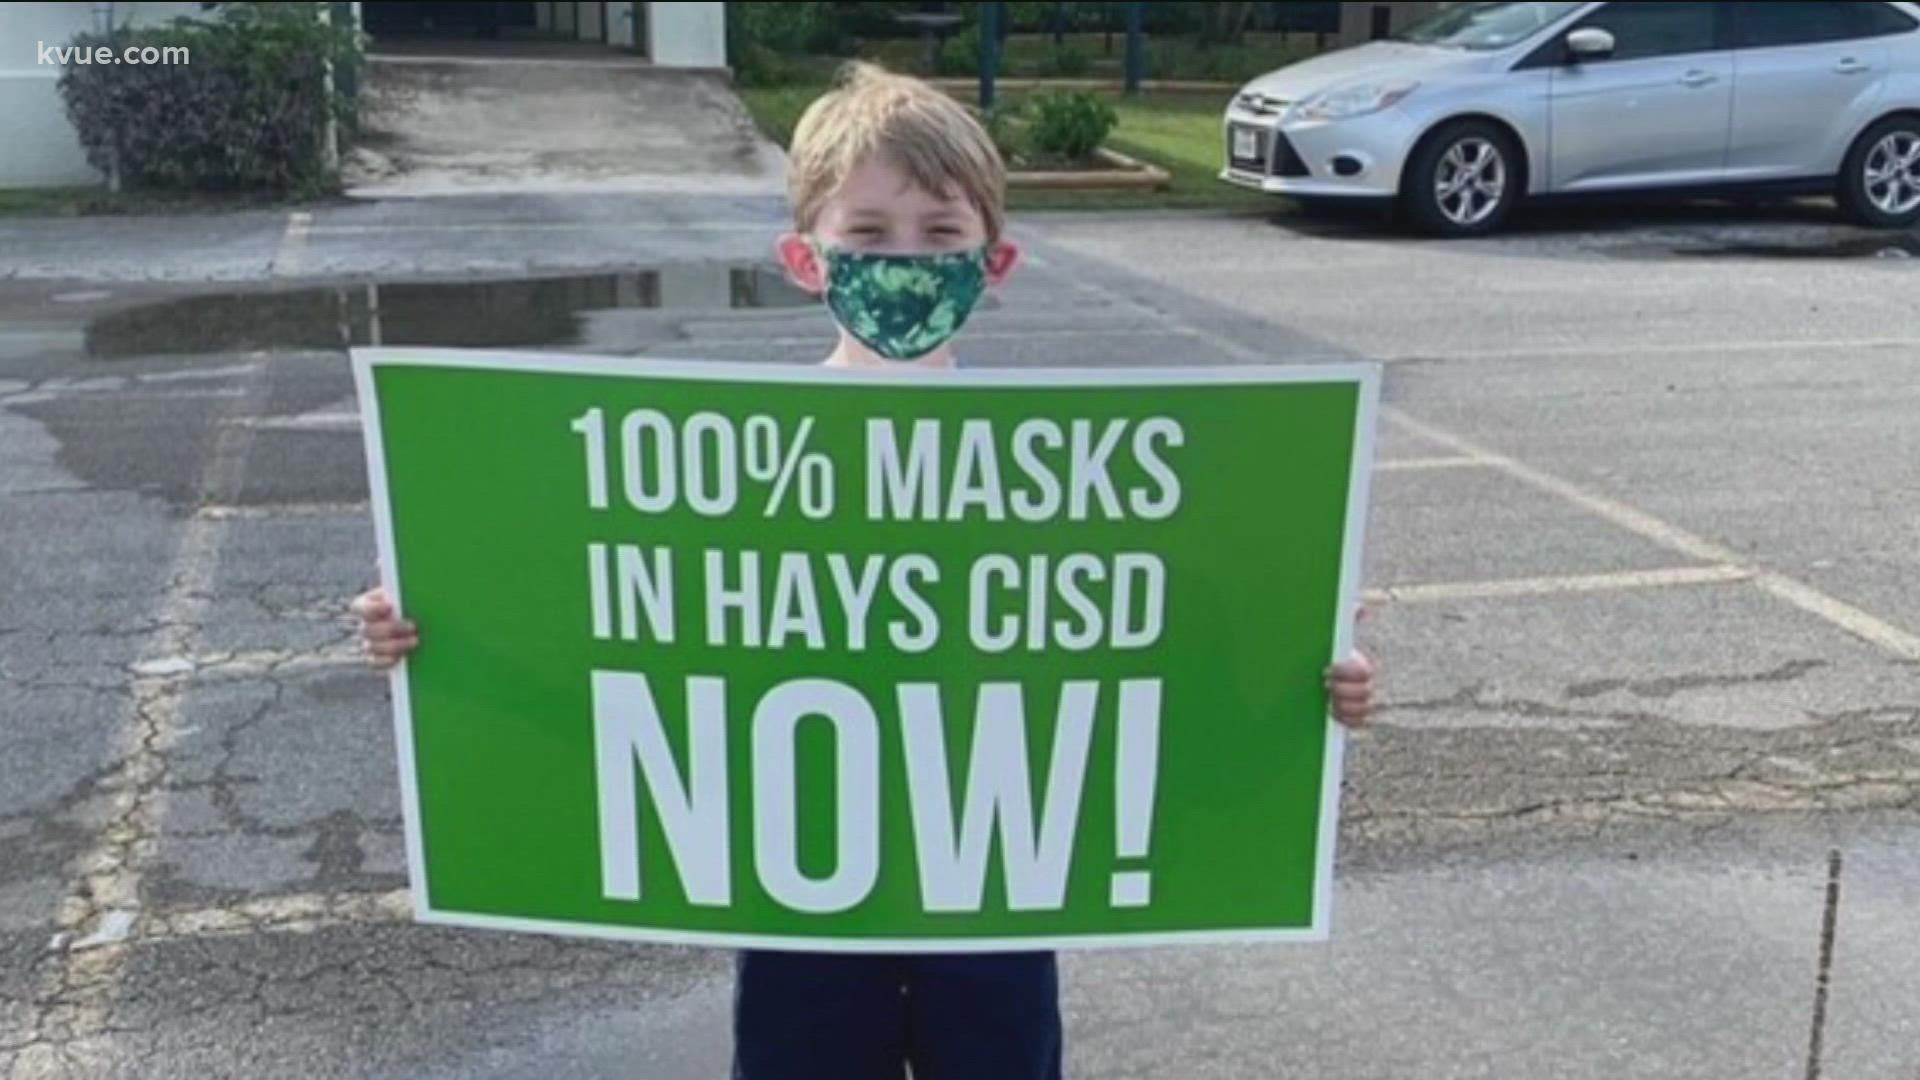 Families United for Student Safety, or FUSS, is the group asking the Hays CISD school board for a mask mandate.